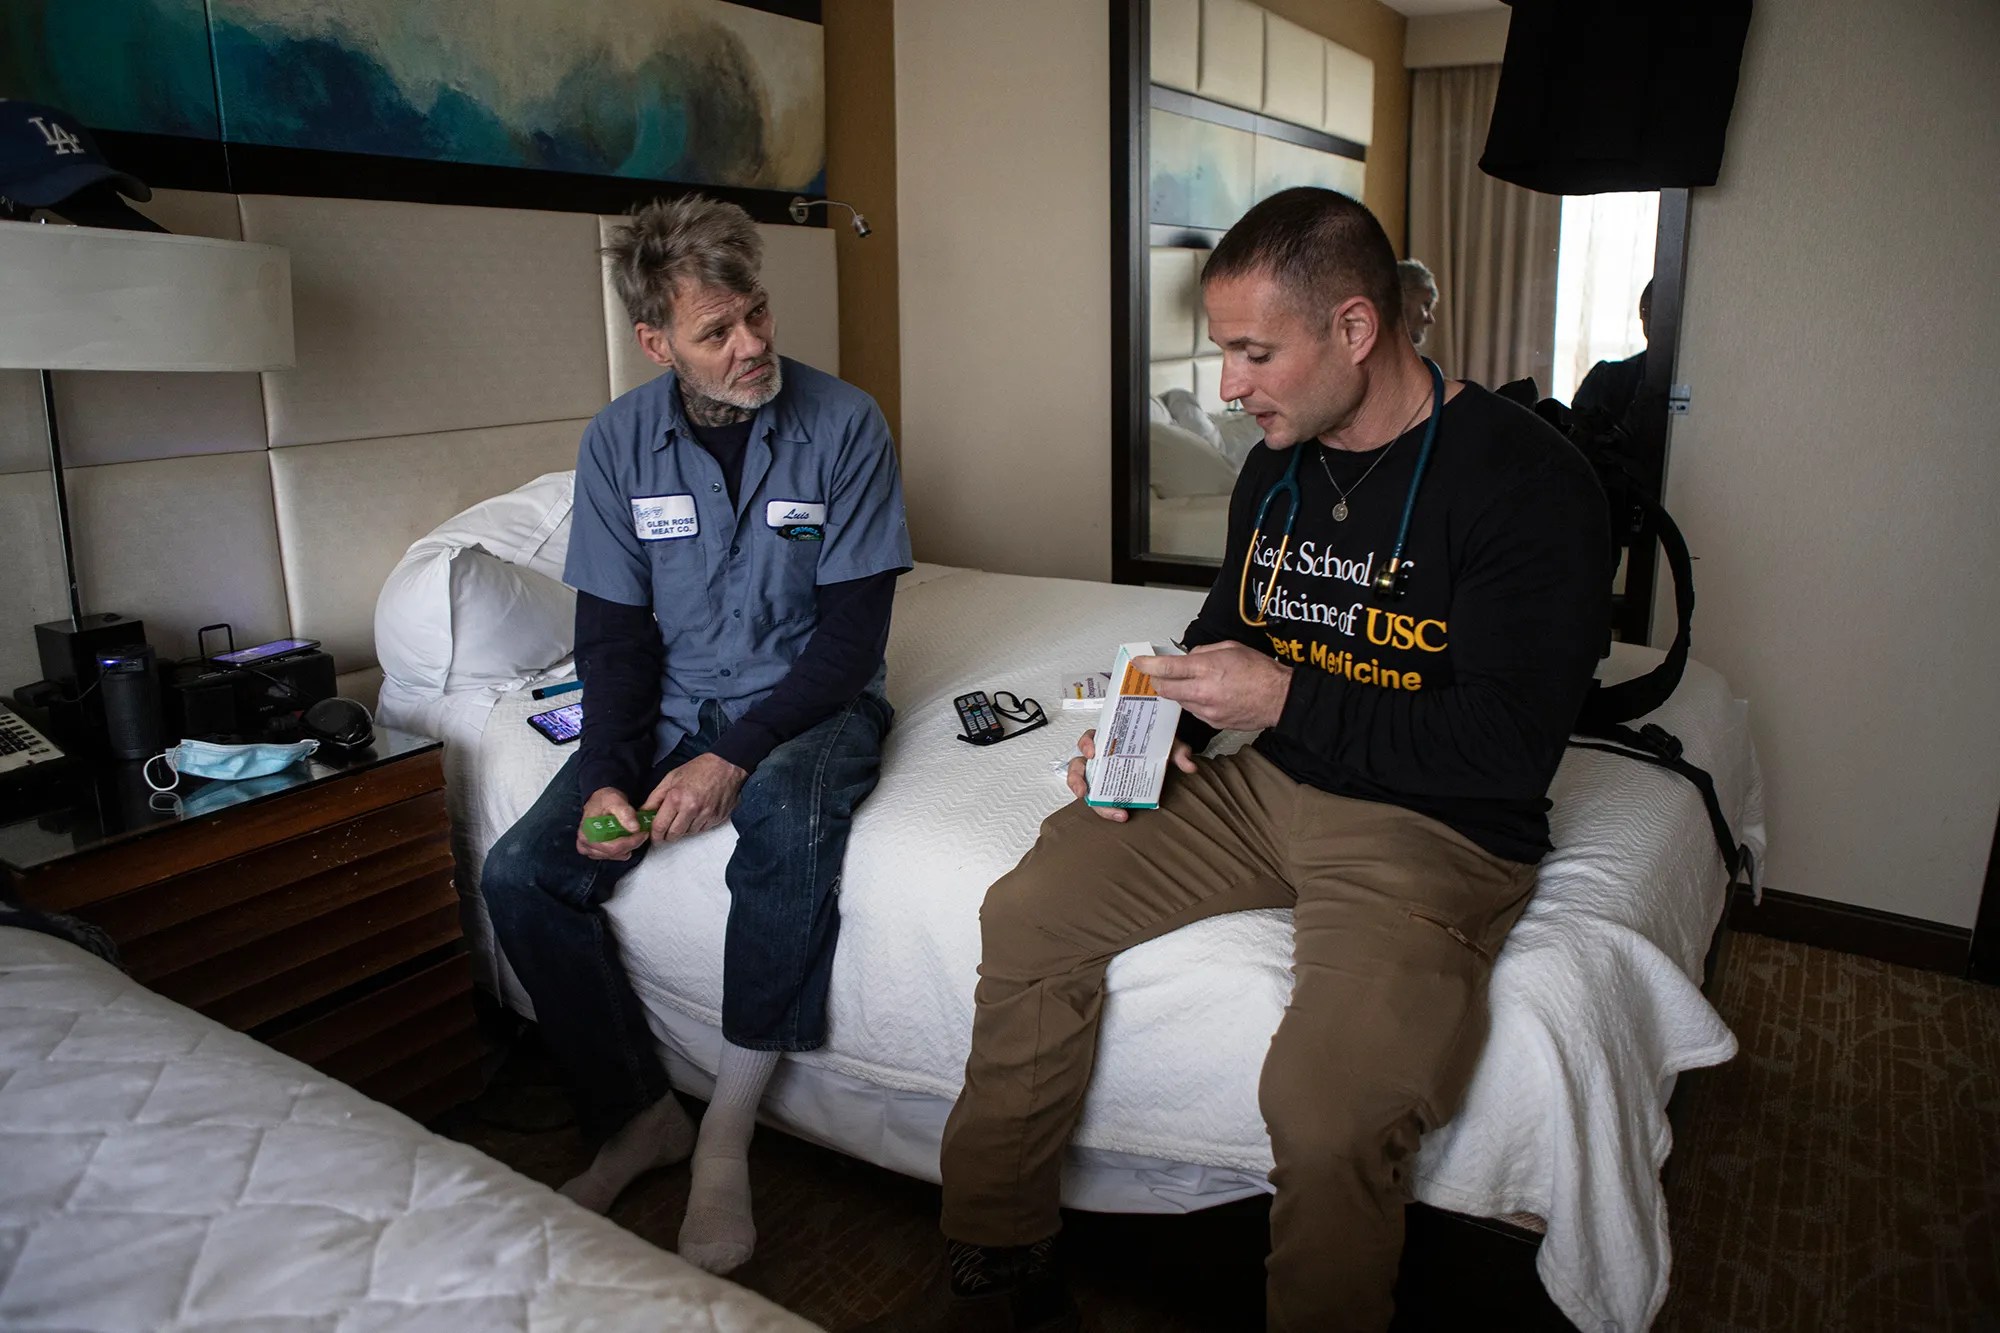 Two men sit on a hotel bed; one holds a medical device, the other looks on, with medical supplies scattered around.